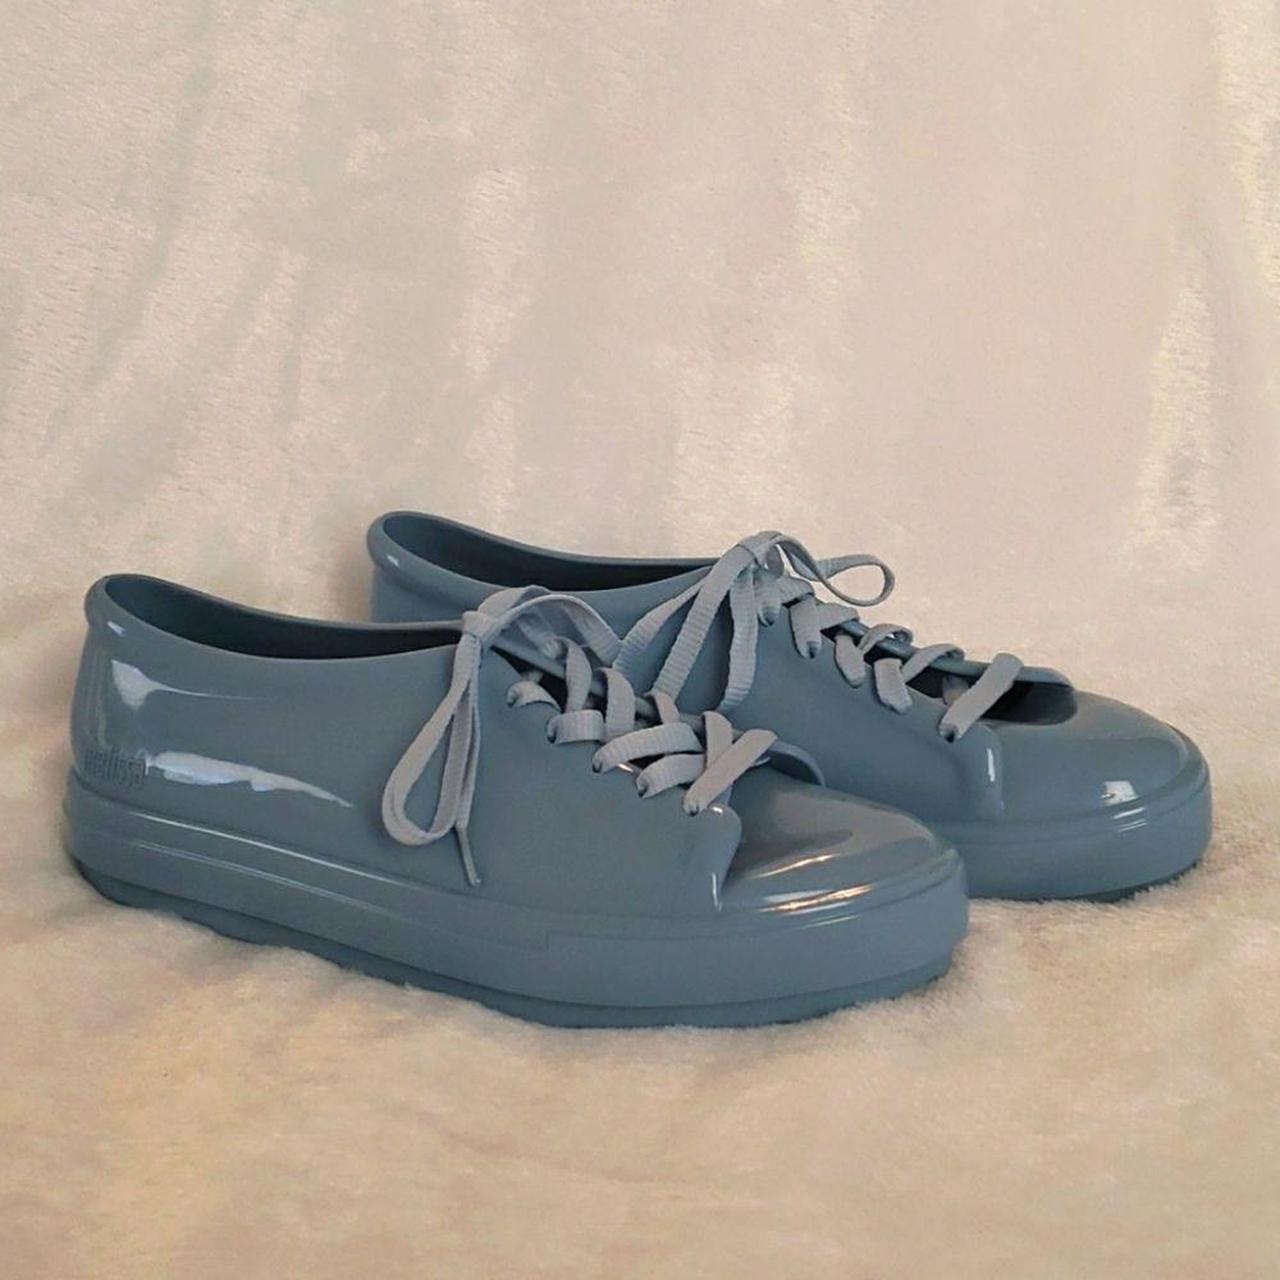 Product Image 2 - EUC women's rubber/plastic shoes in